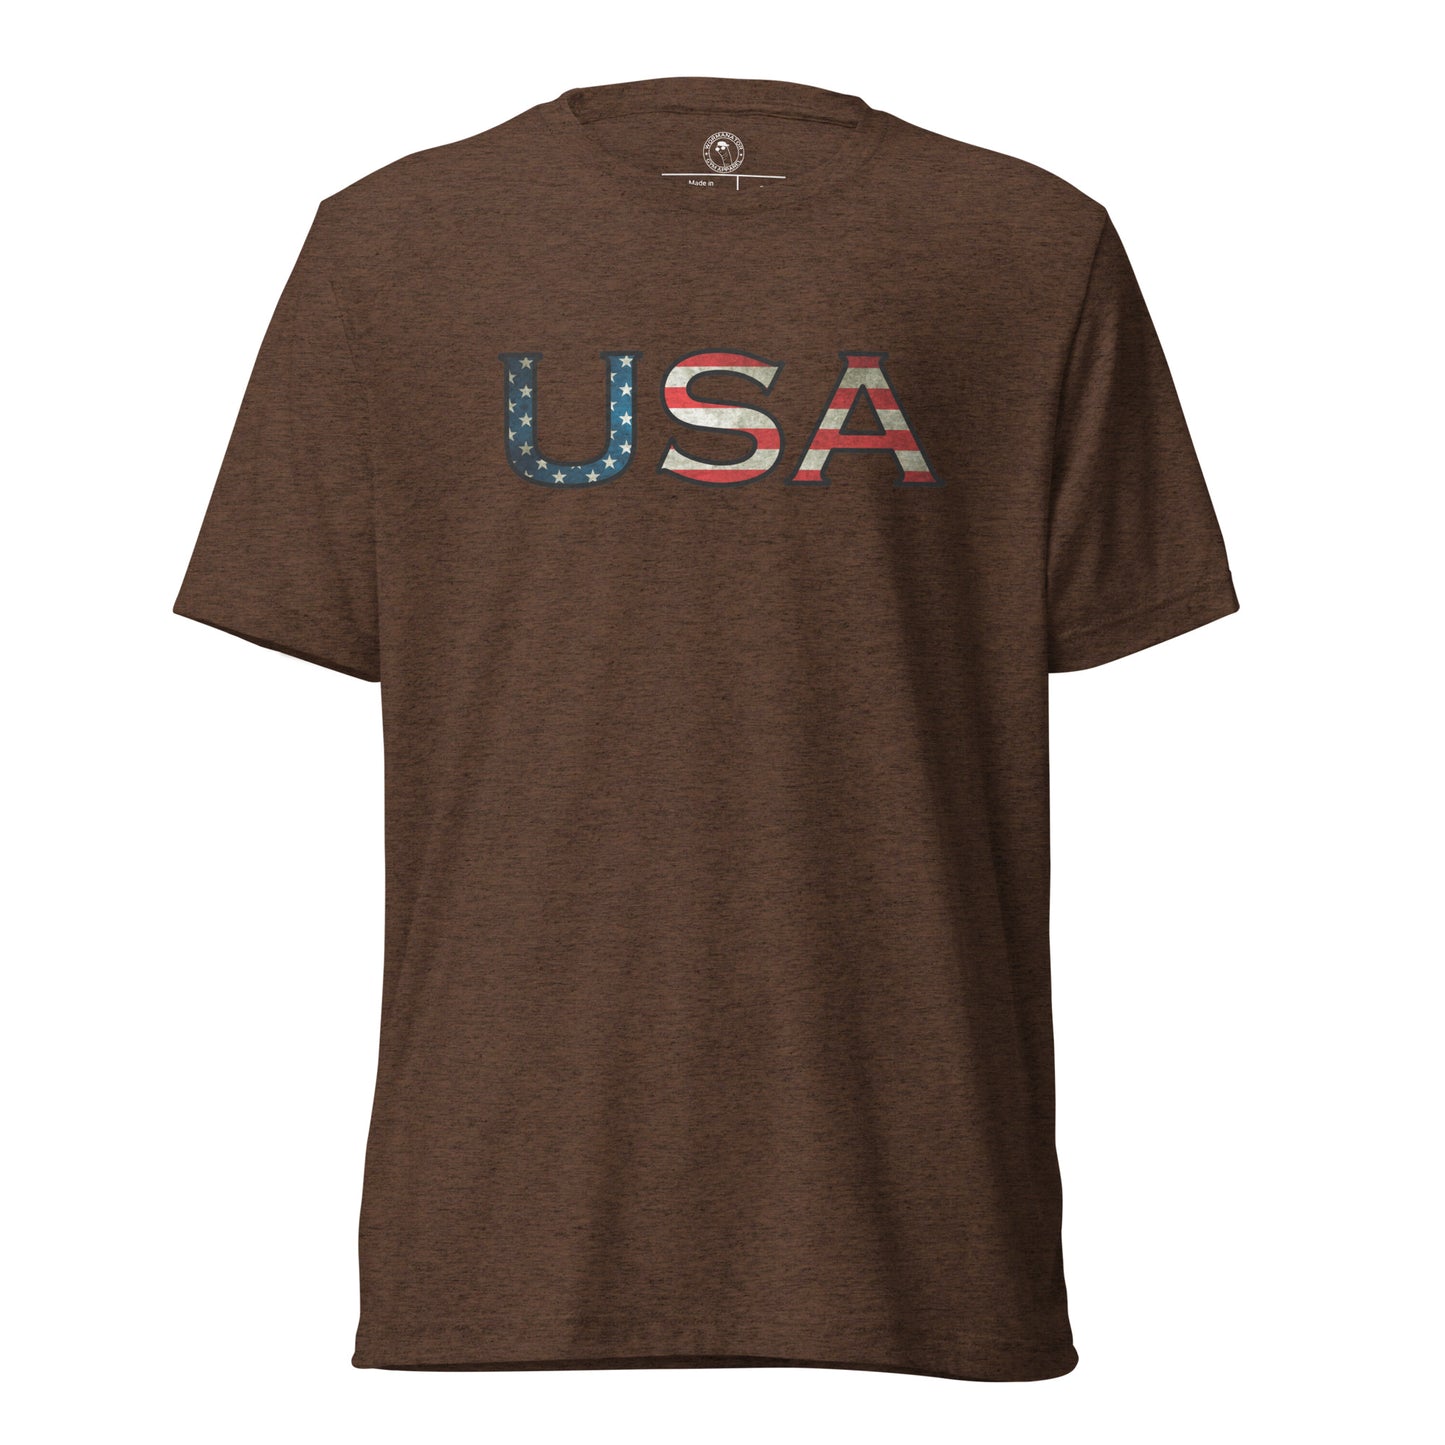 USA T-Shirt in Brown Triblend